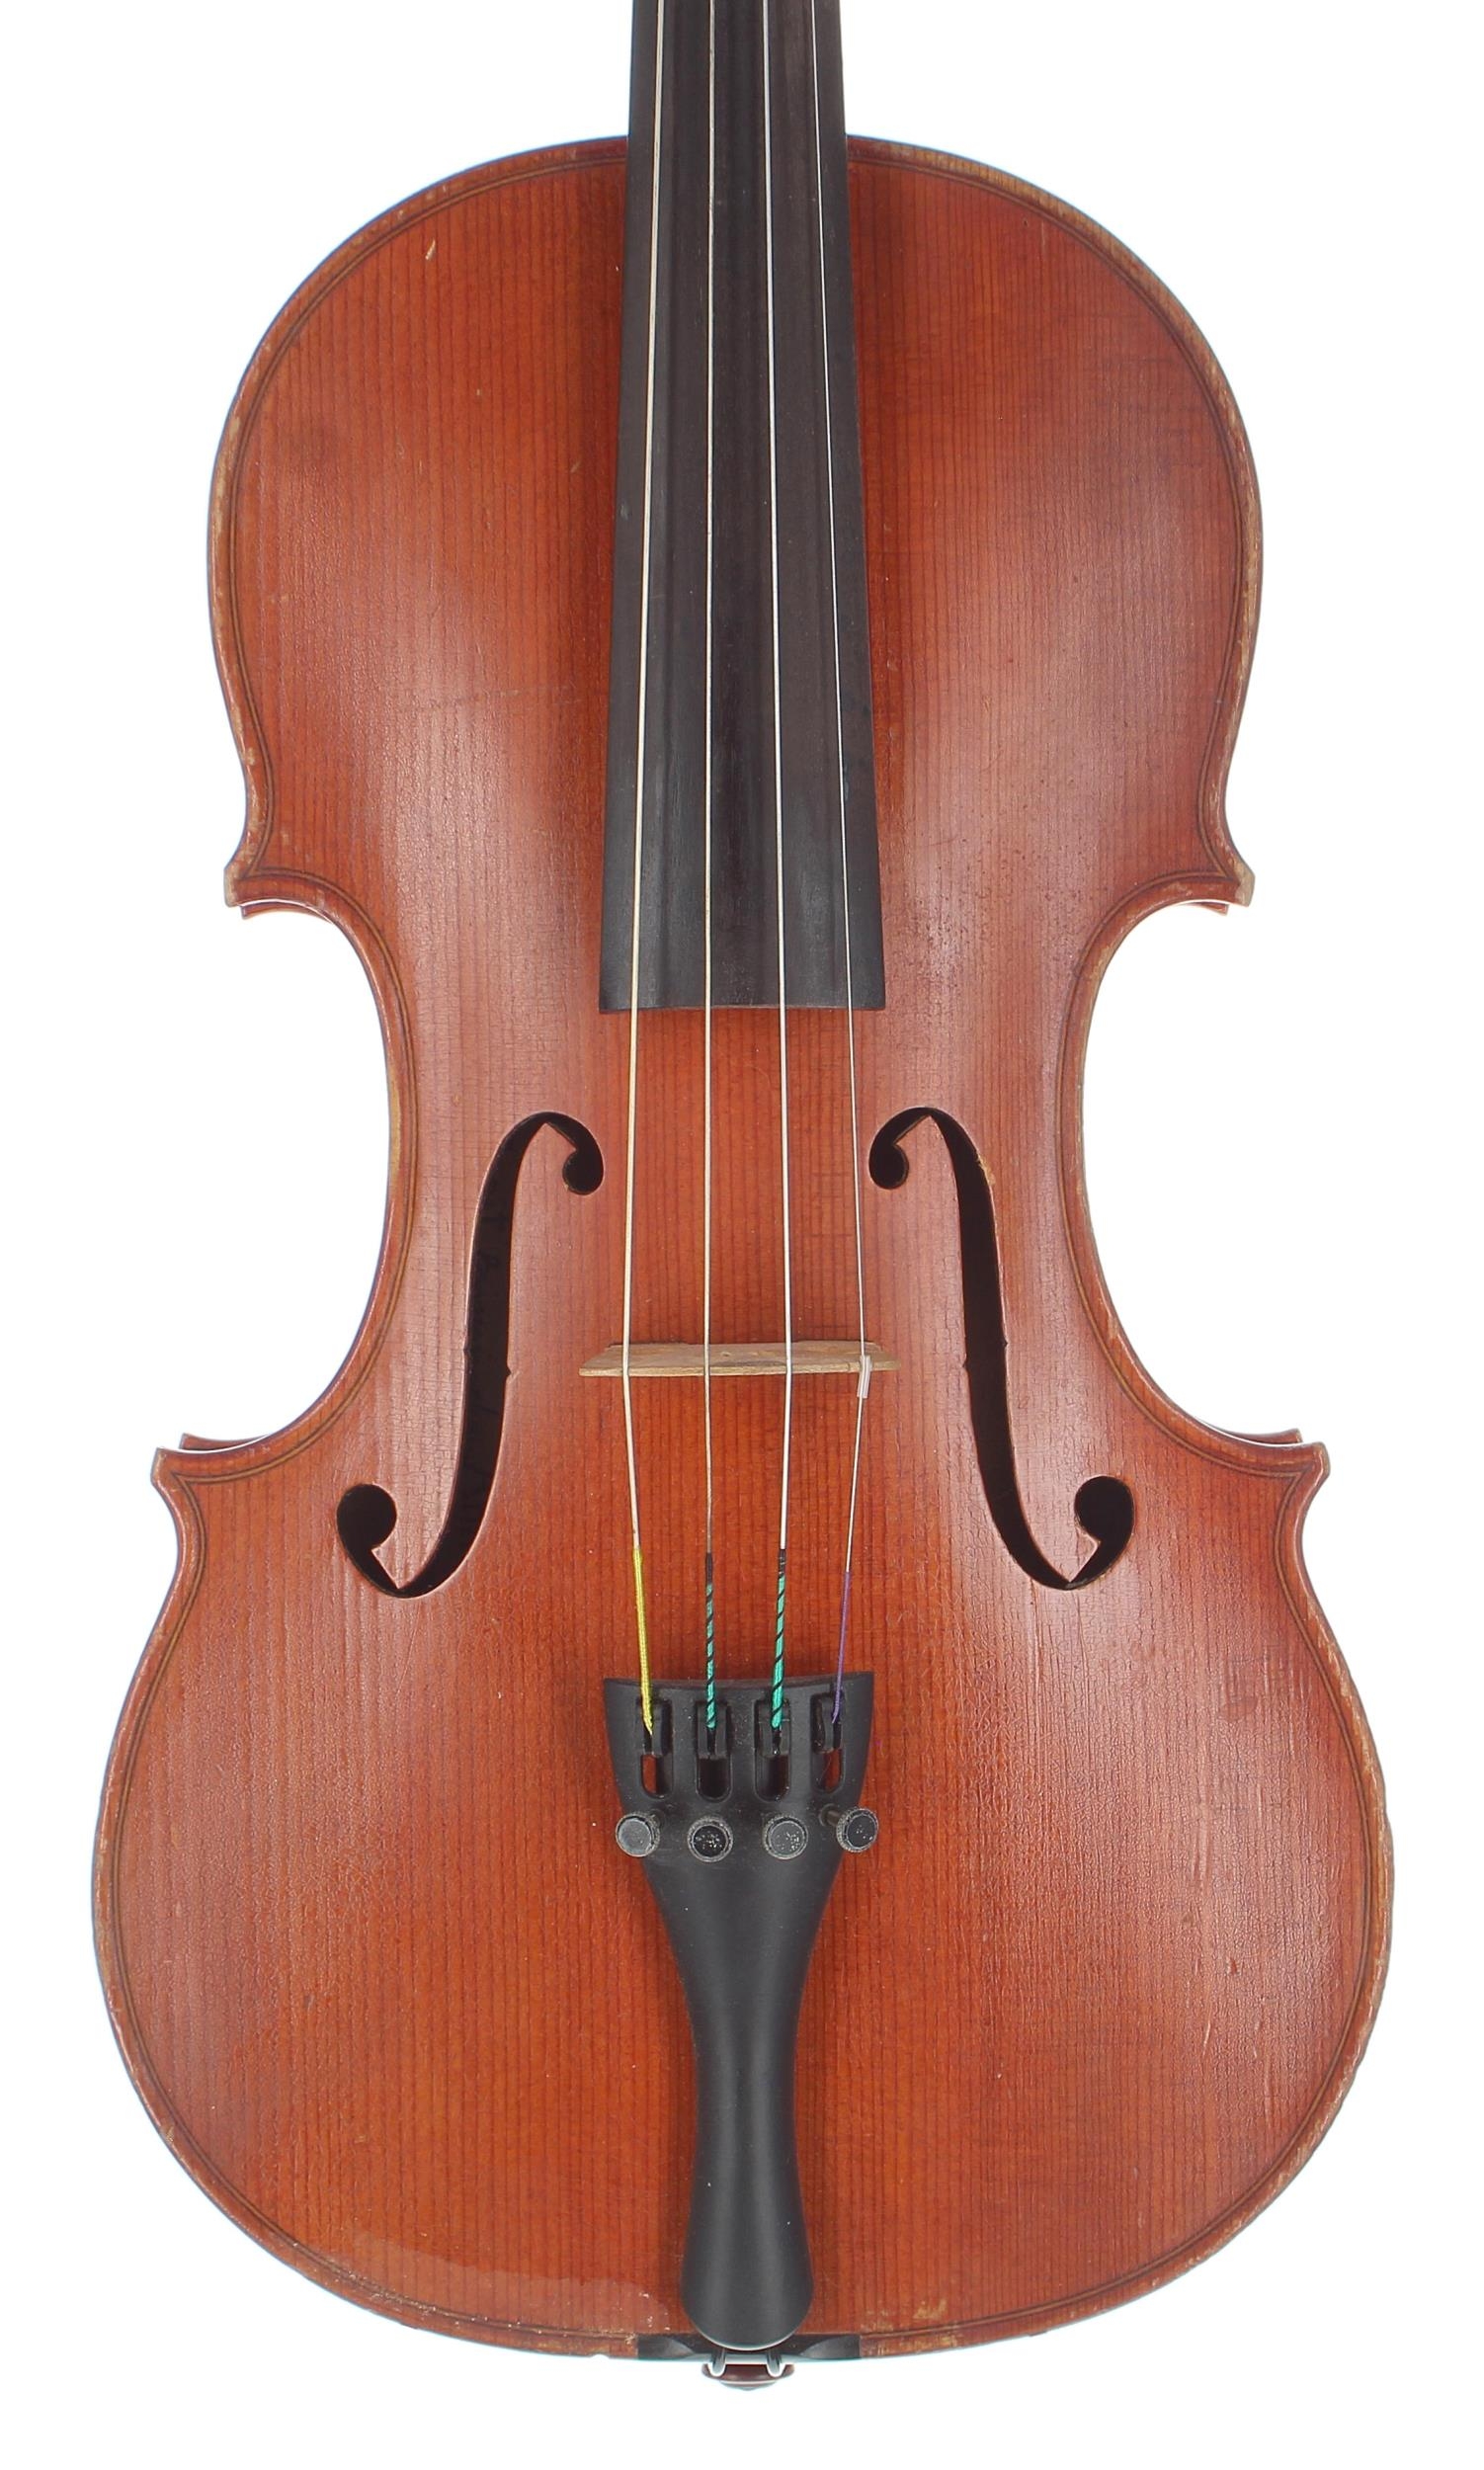 Violin by and labelled Jan Kudanowski, Fecit Birmingham Anno 1980, no. 89, the two piece back of